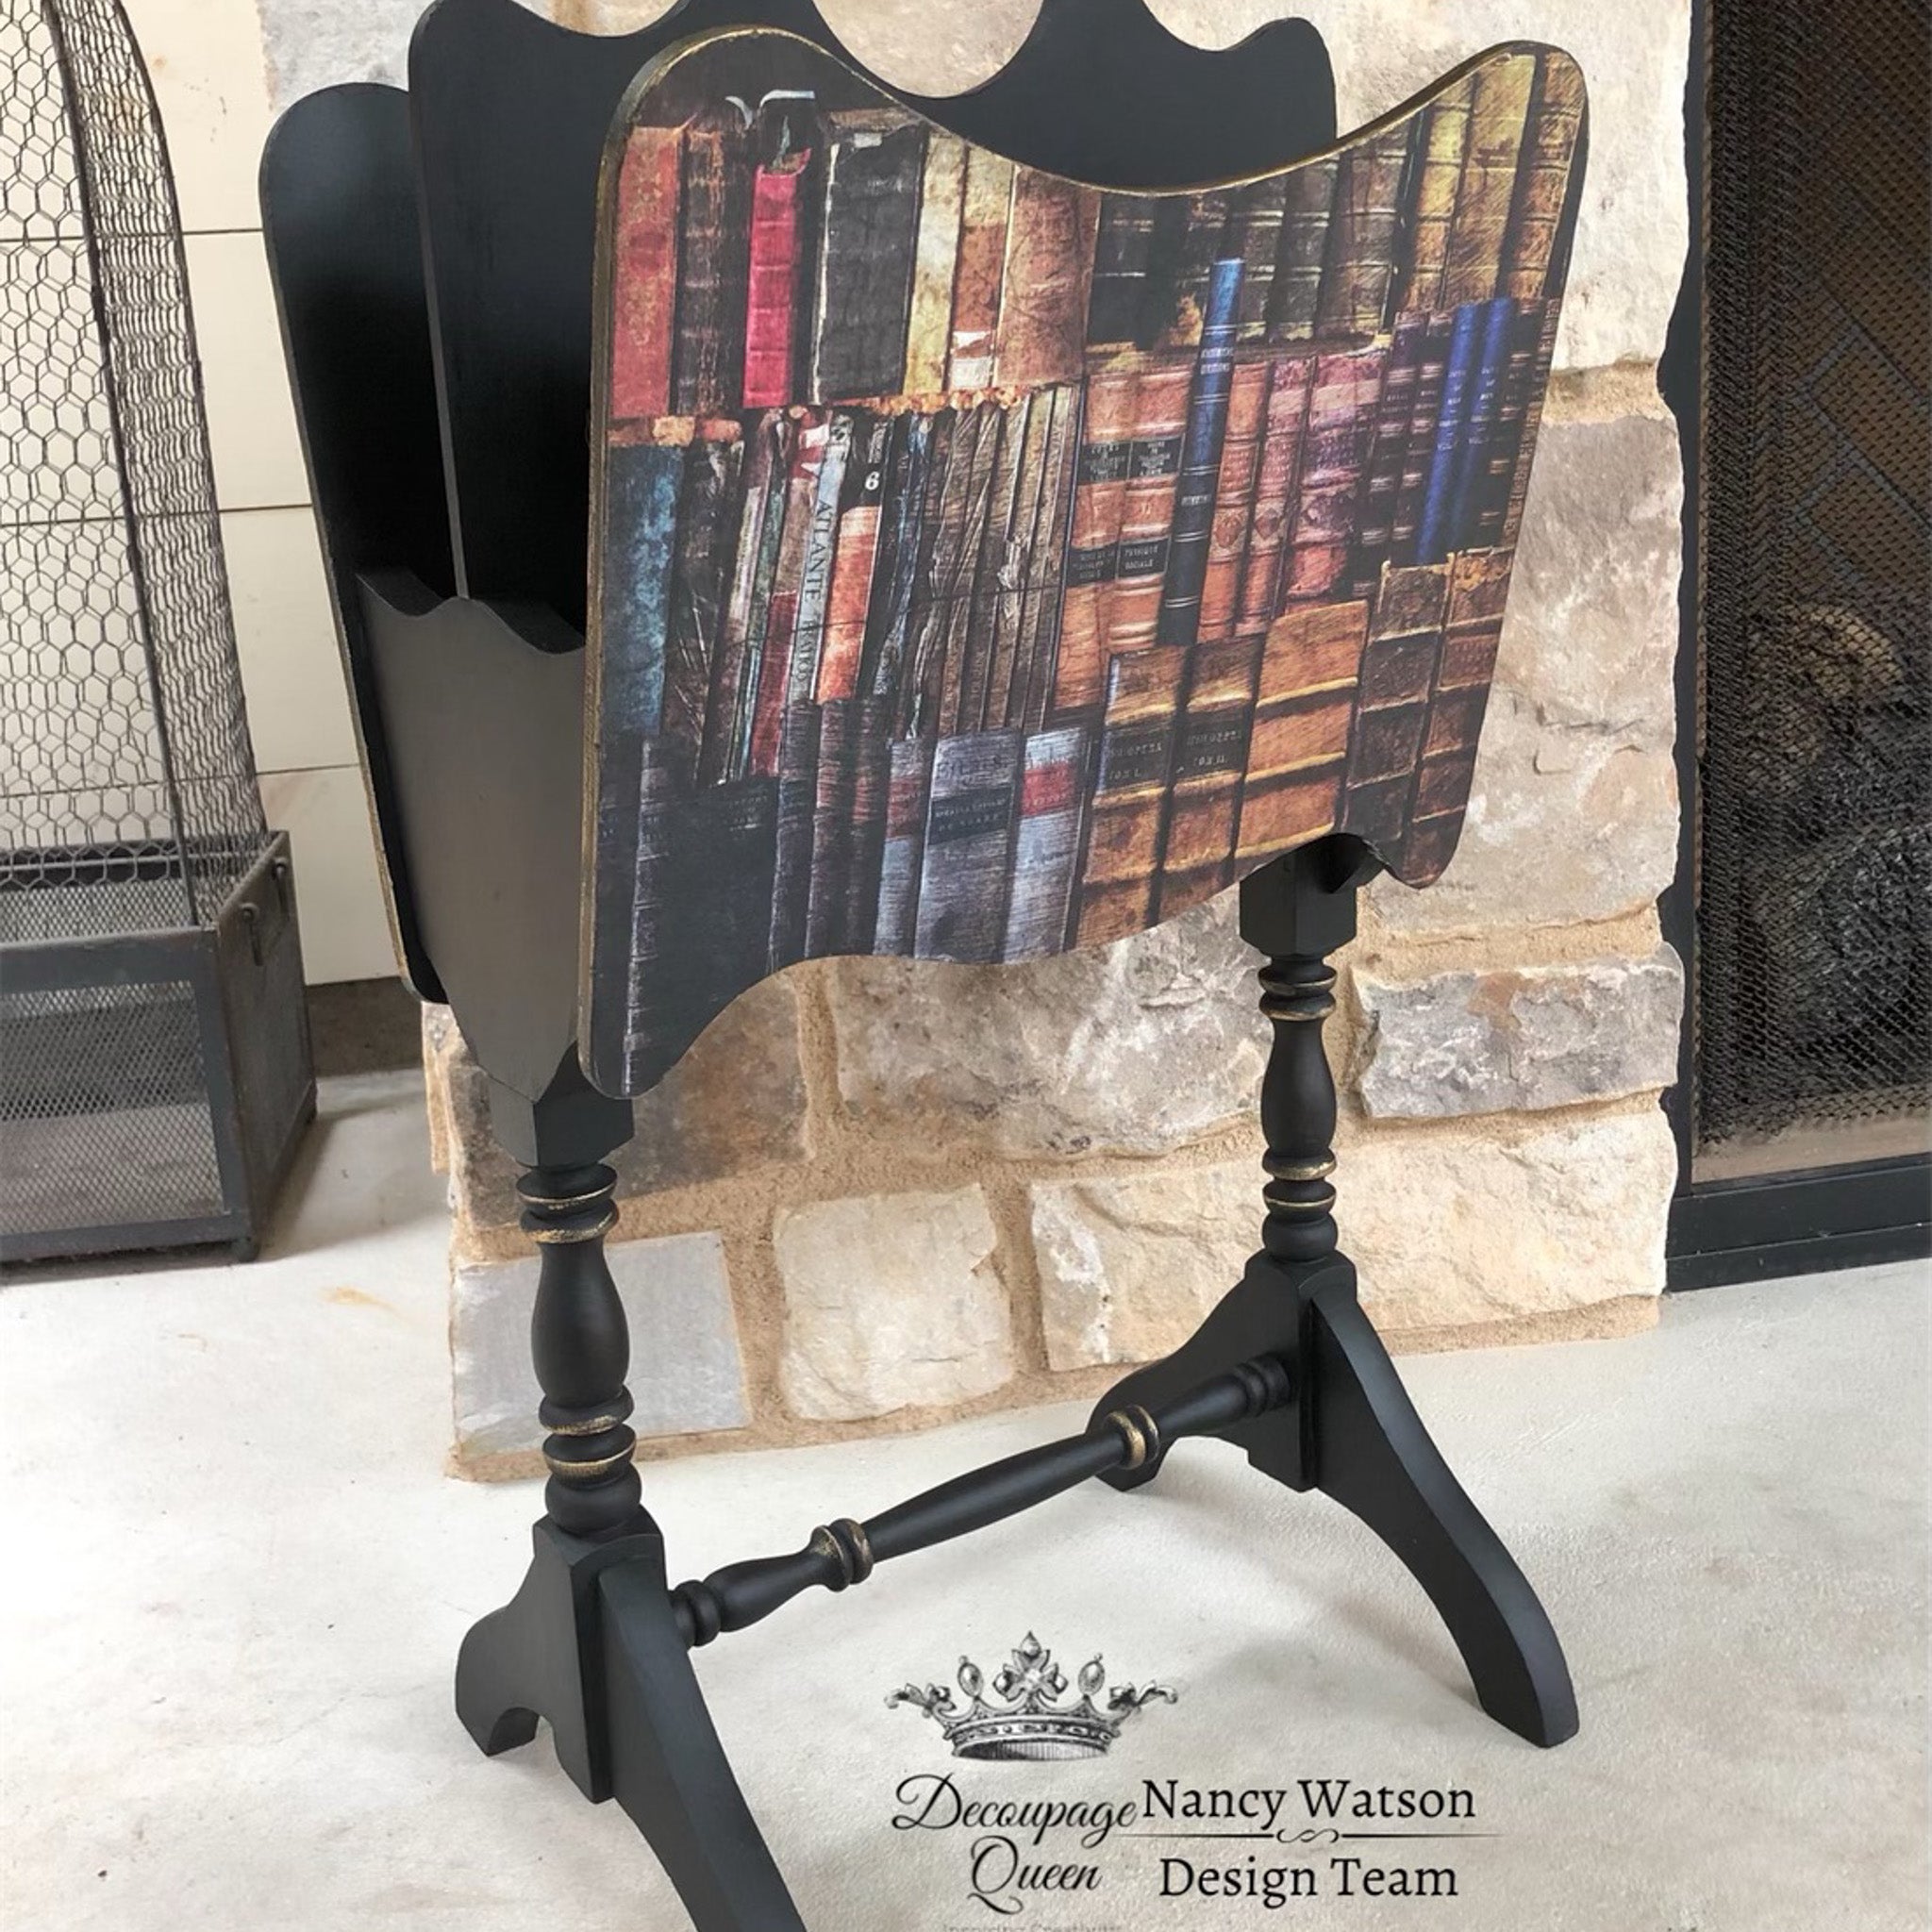 A black book organizer stand with the Dusty Library decoupage paper on top. A black Decoupage Queen and Nancy Watson Design Team logo on the bottom right.